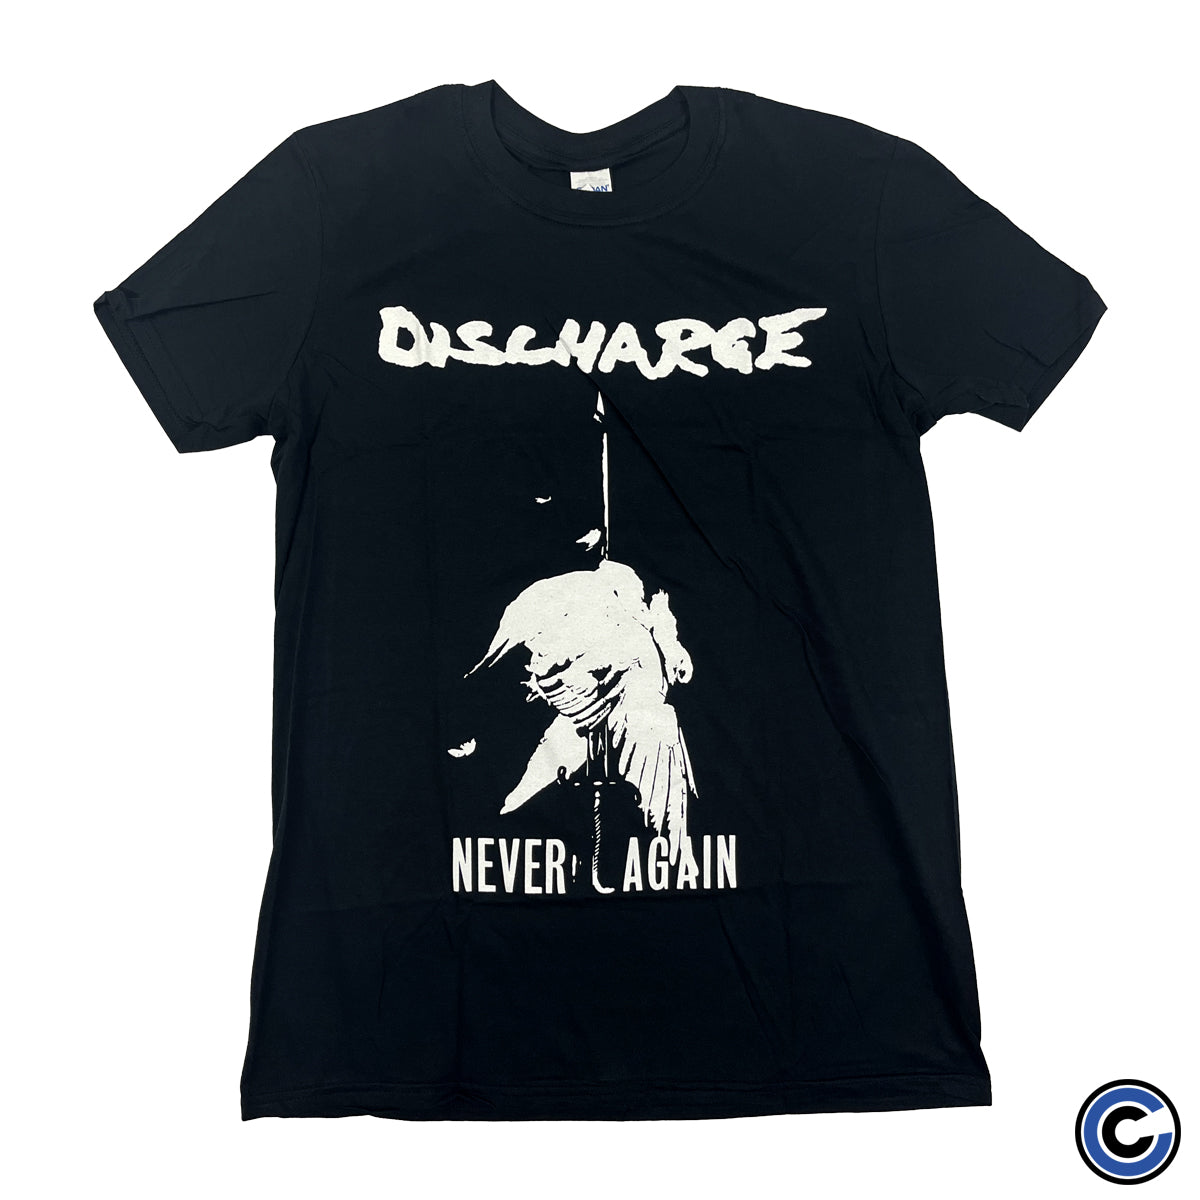 Discharge "Never Again" Shirt